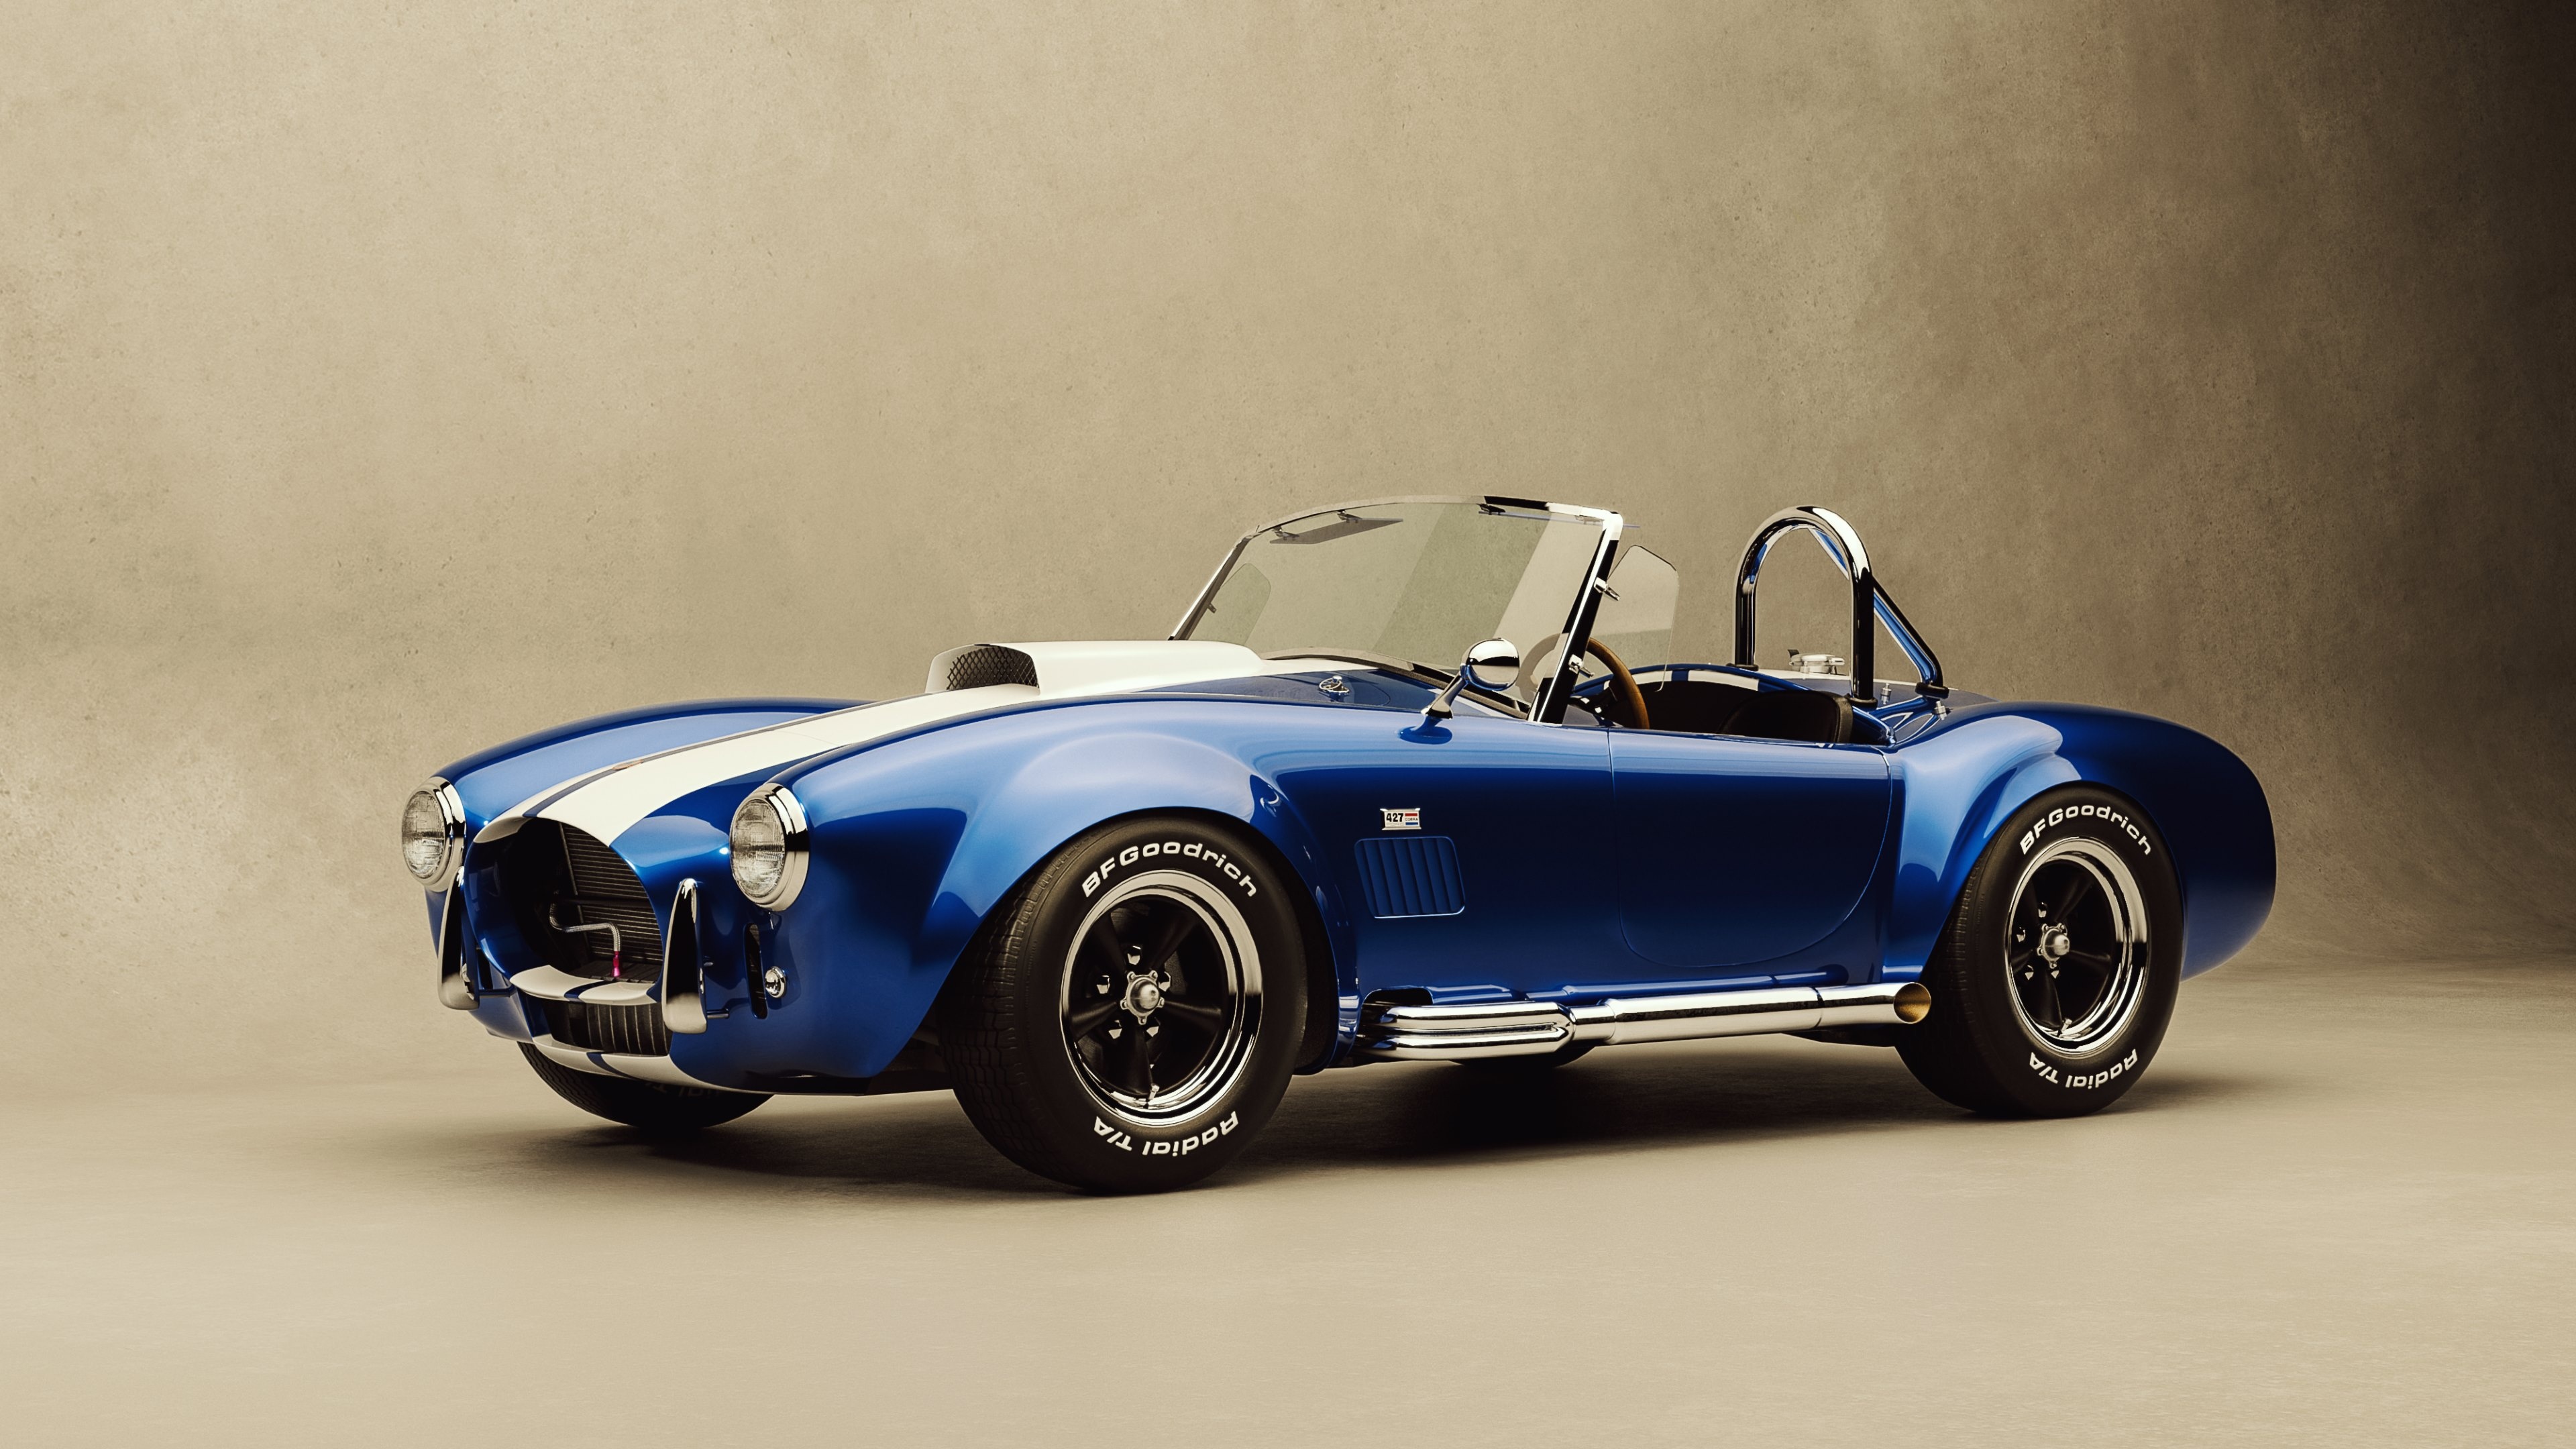 Vintage Car: Ford Shelby Cobra 427, Characterized by their classic design and elegant lines. 3840x2160 4K Background.